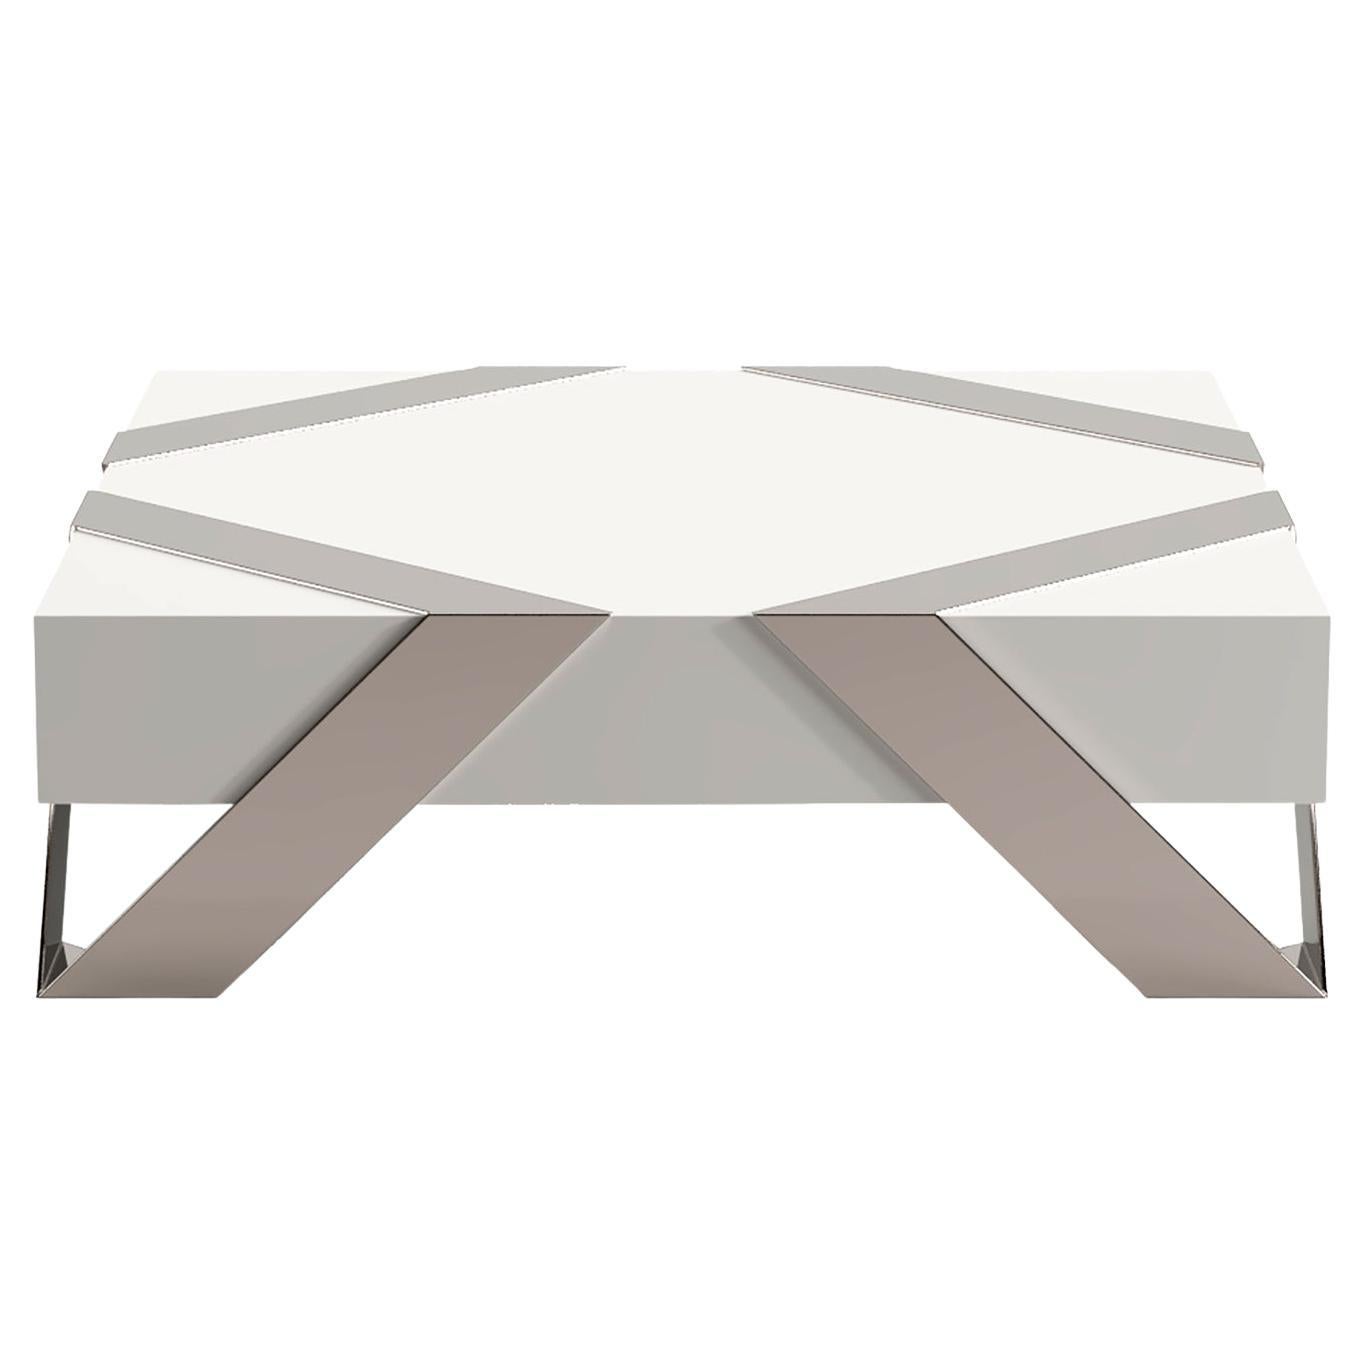 21st Century Modern Center Coffee Table White Lacquer Brushed Stainless Steel